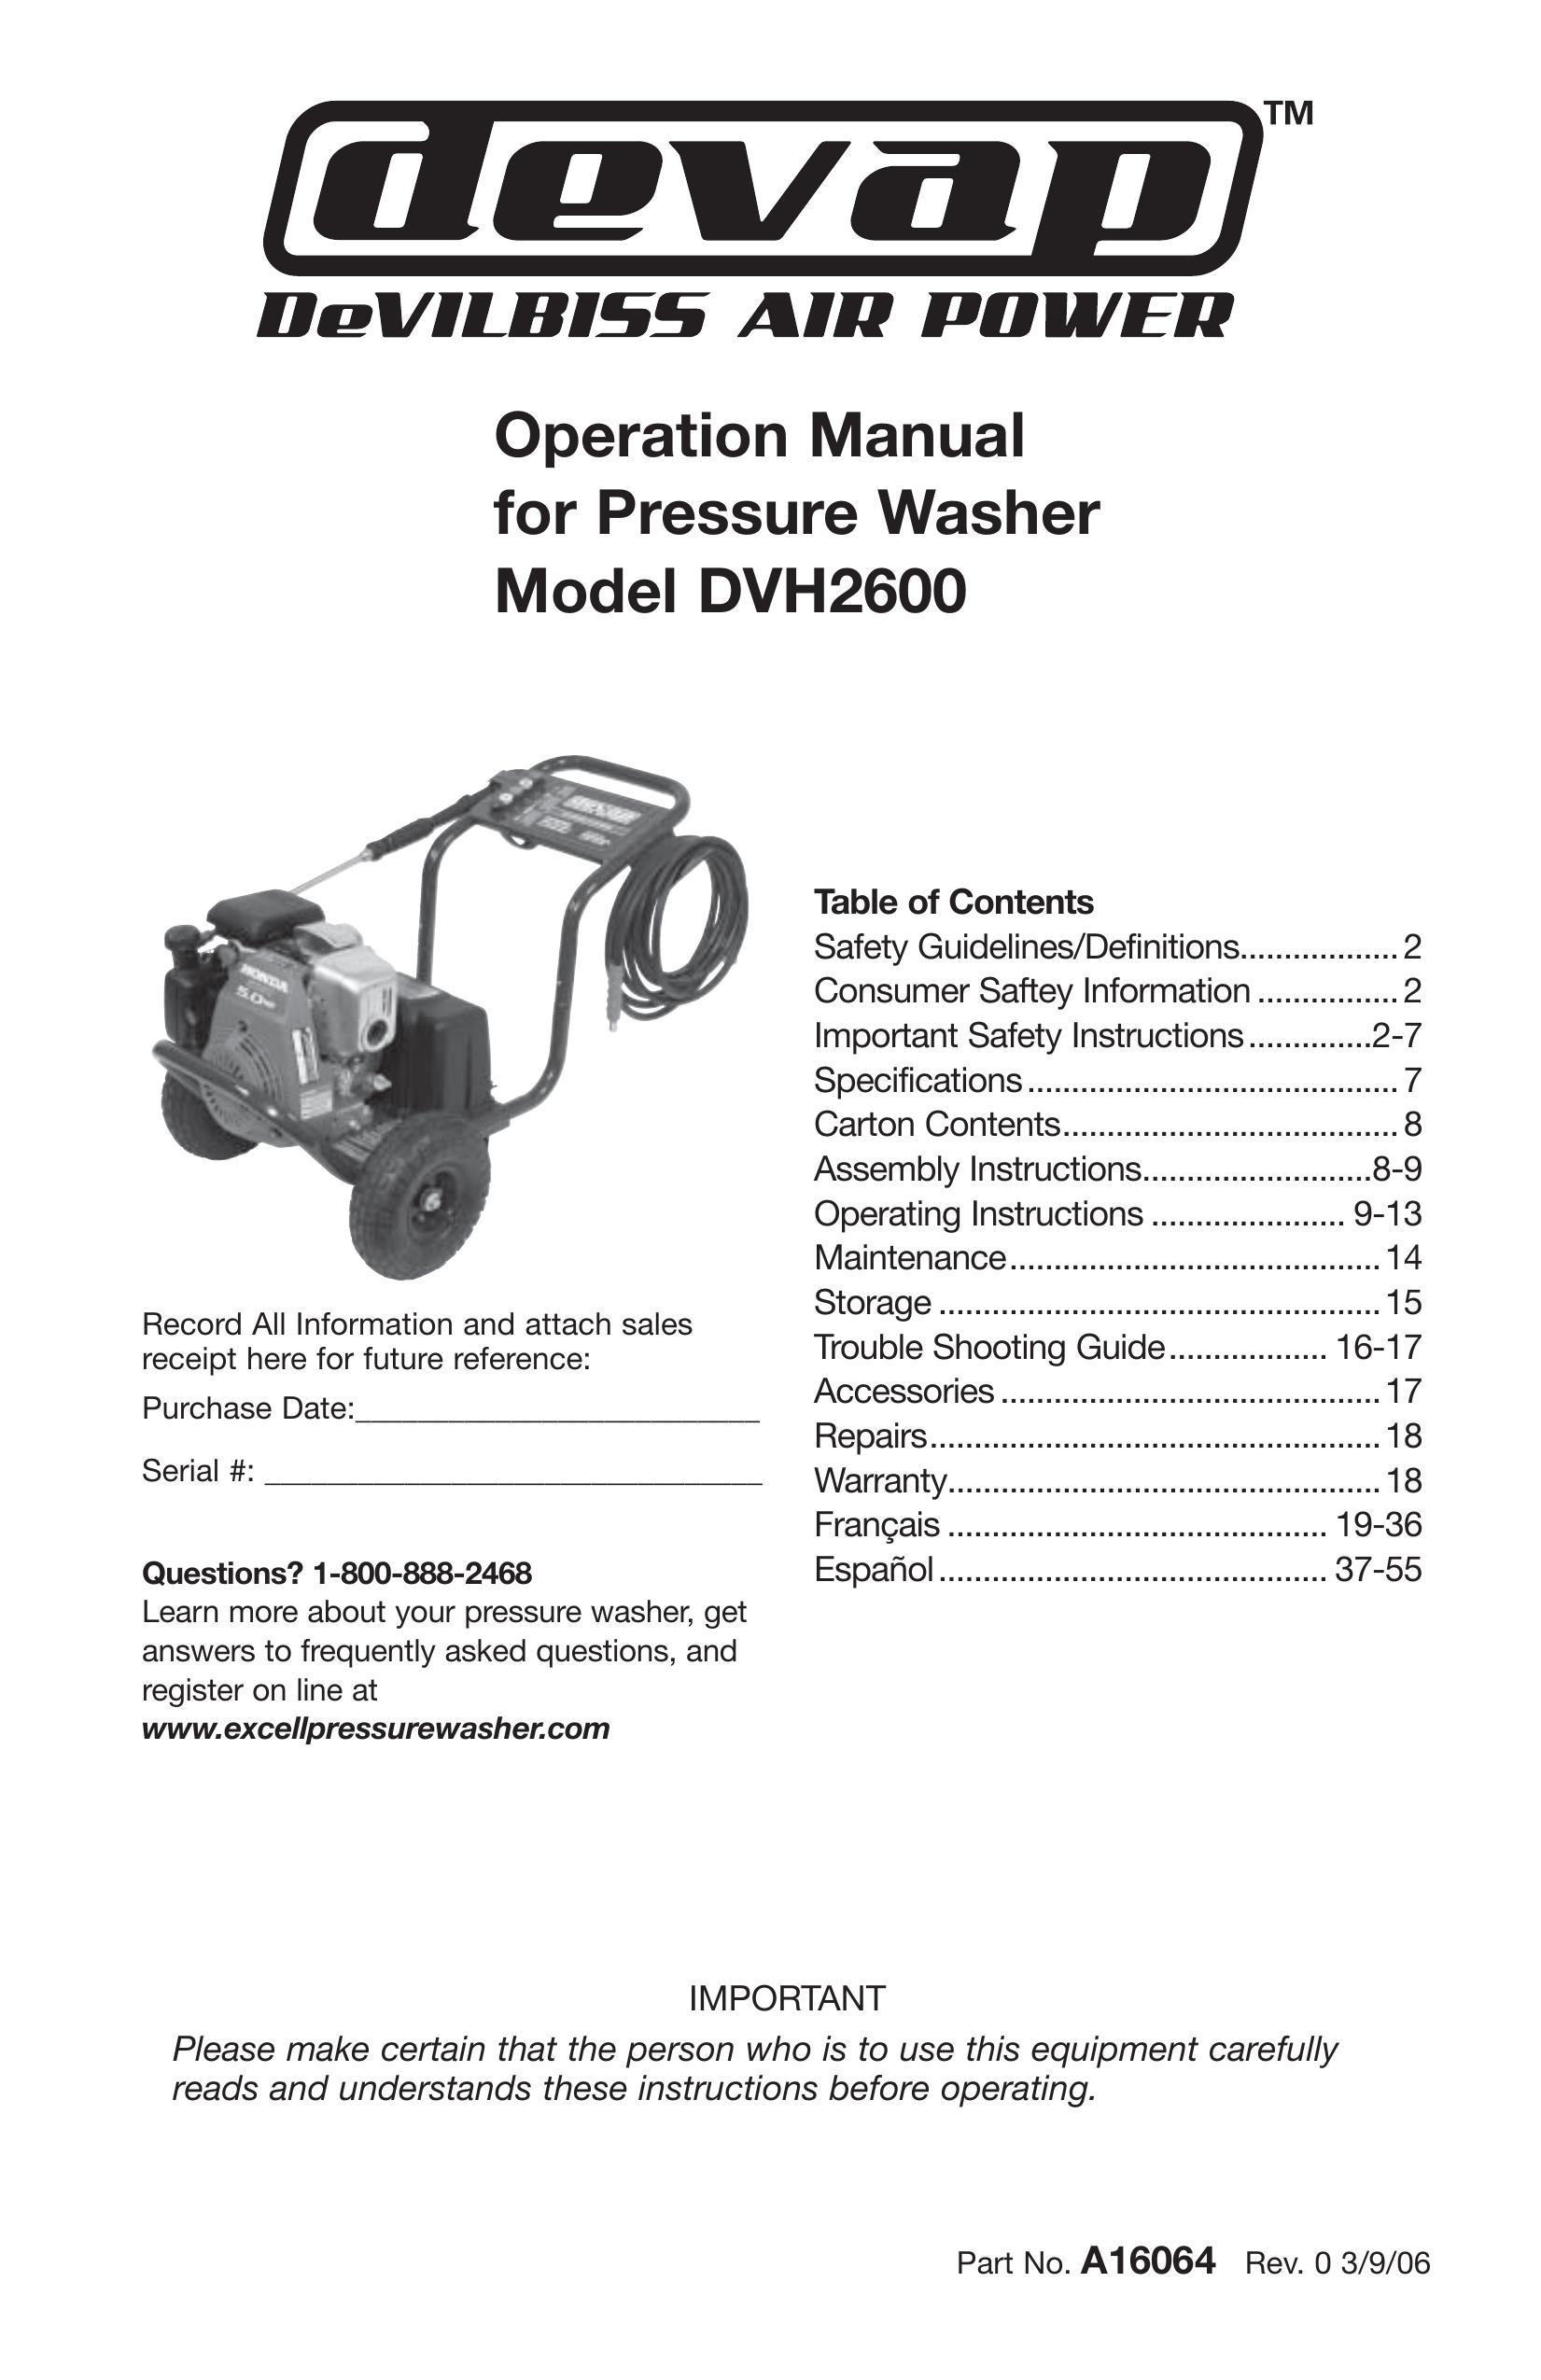 DeVillbiss Air Power Company A16064 Pressure Washer User Manual